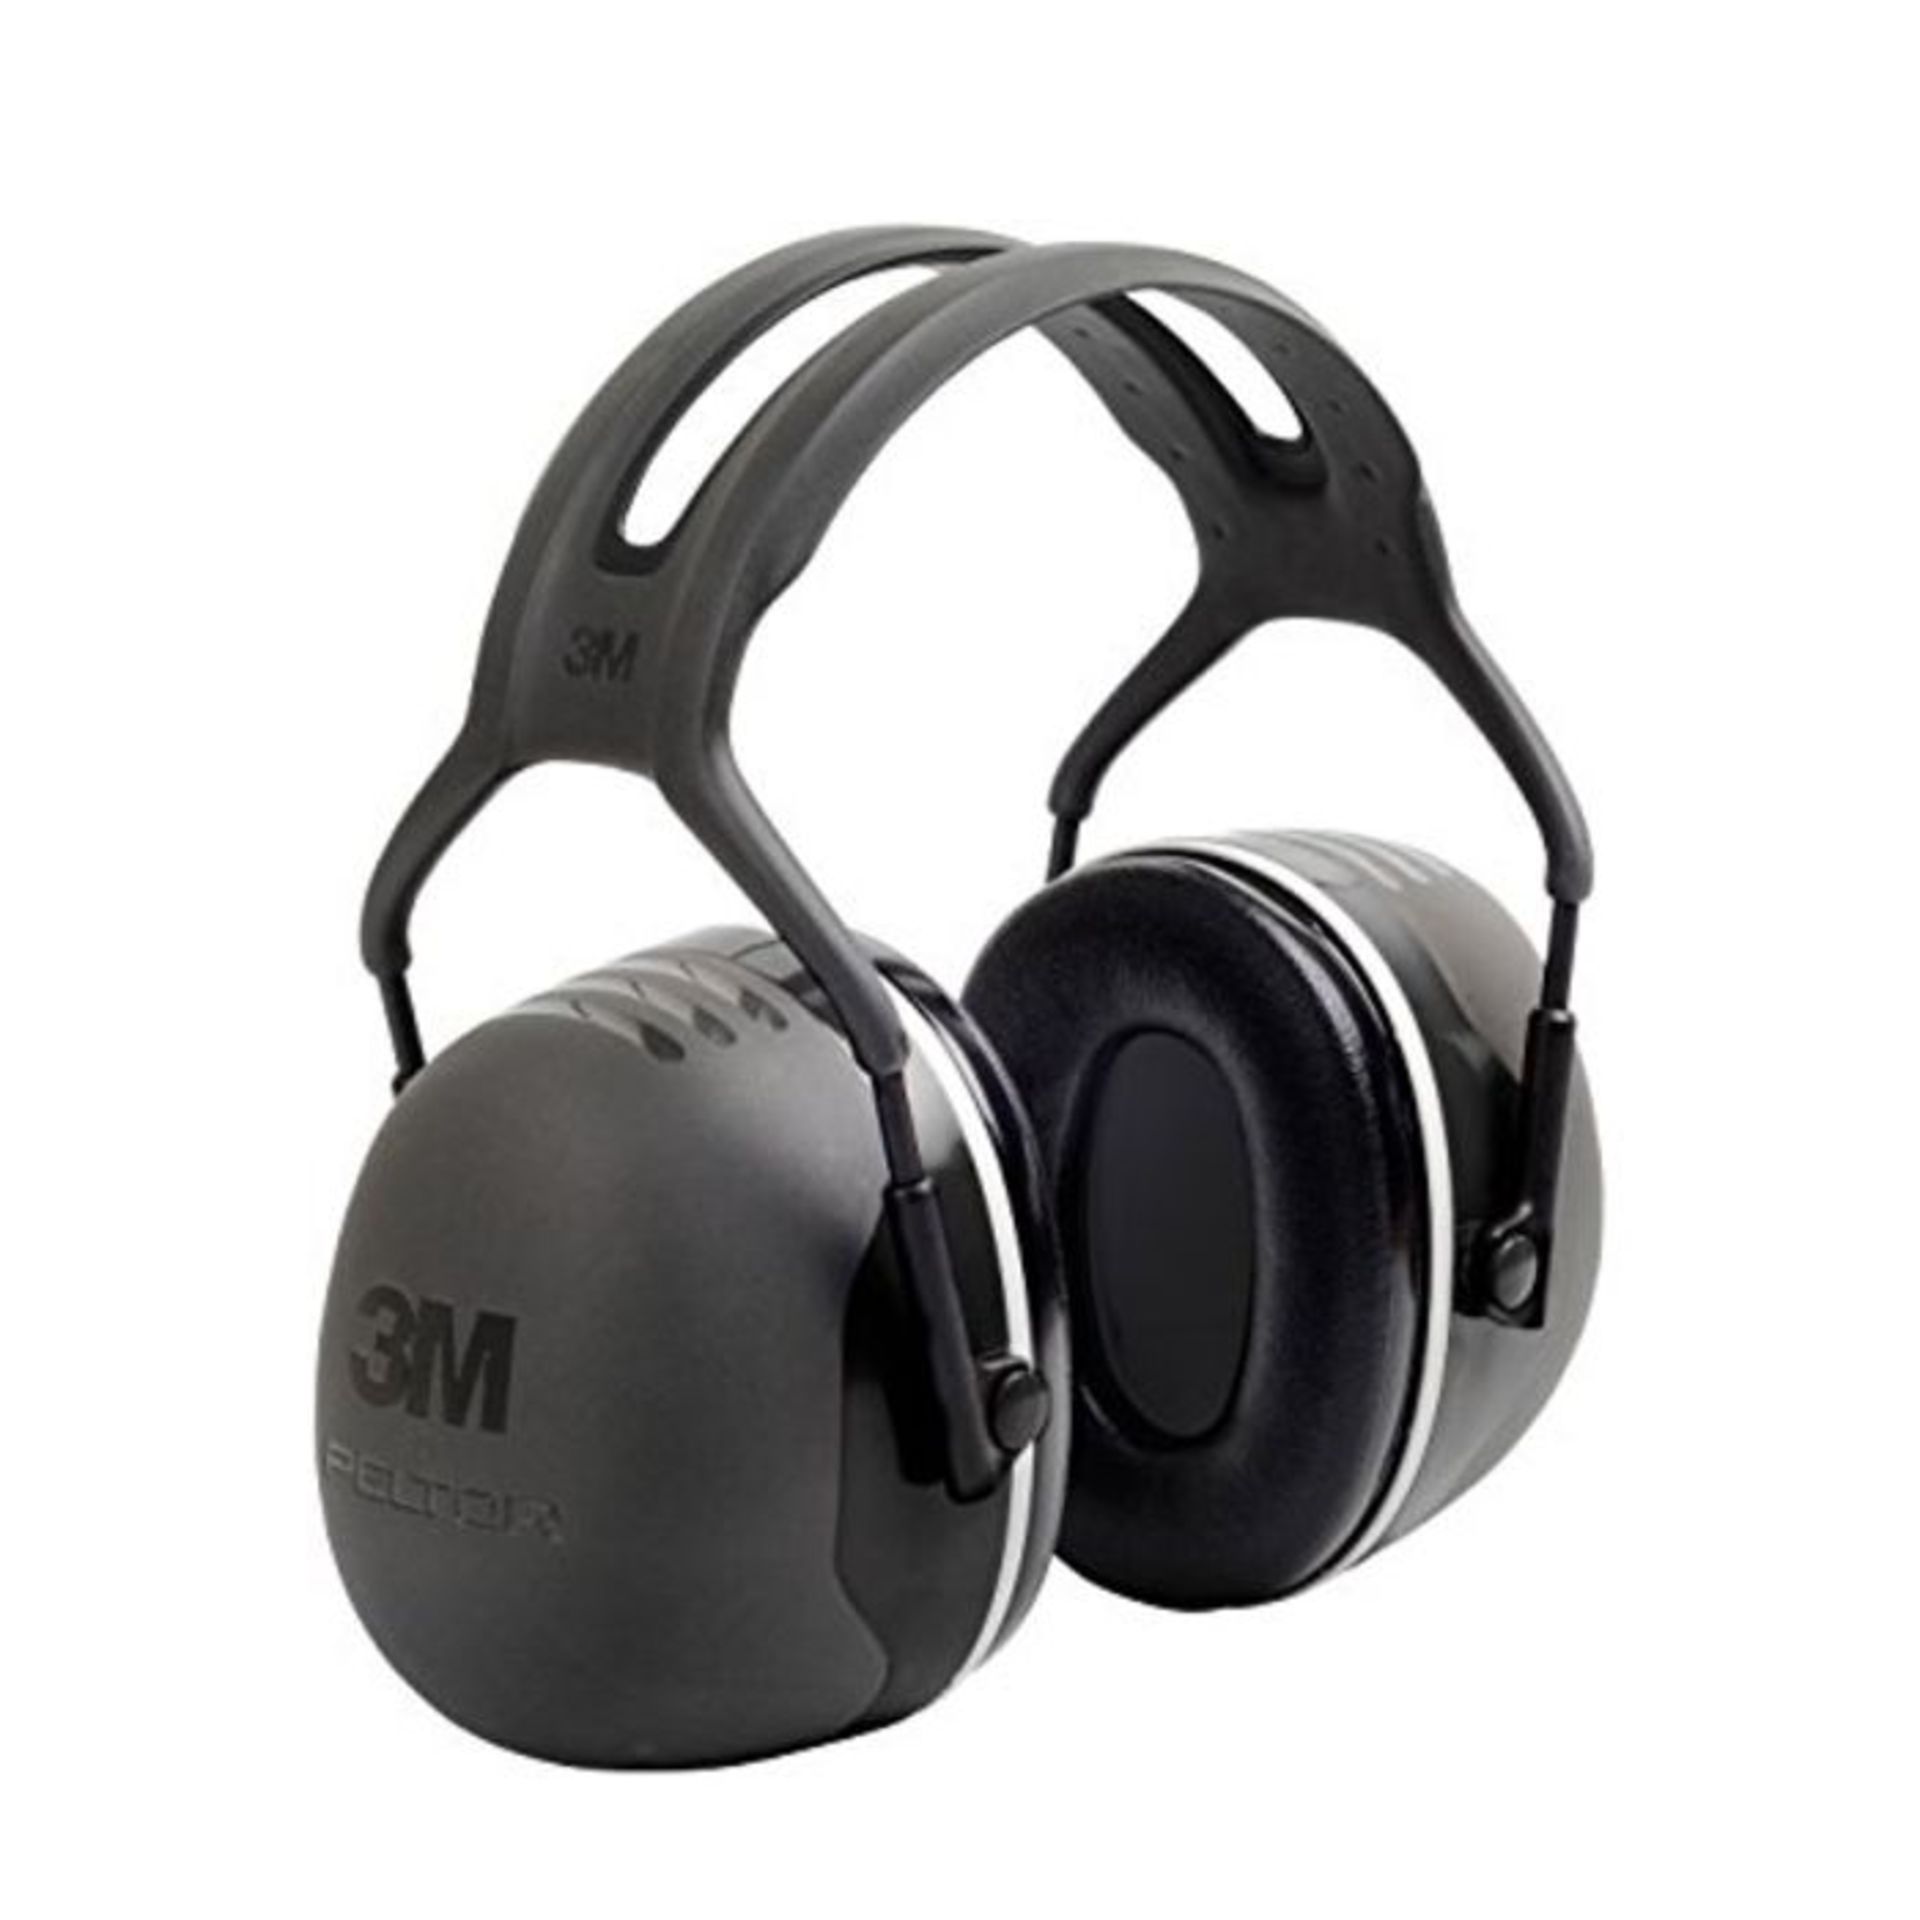 3M Peltor X5A Ear Defenders with Headband, Earmuffs for Reliable Hearing Protection Ag